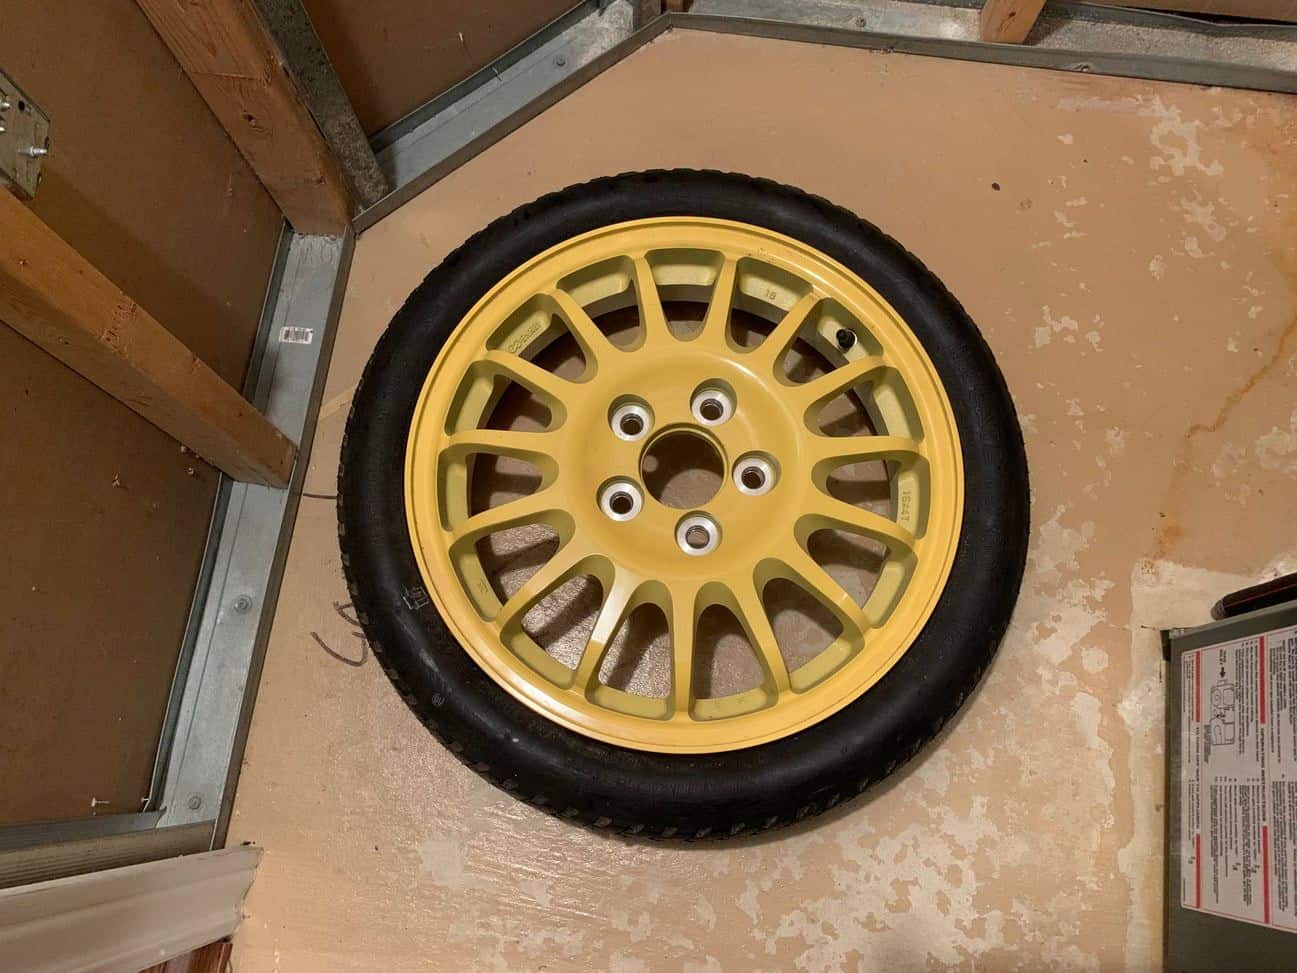 Wheels and Tires/Axles - 94 Spare Enkei wheel - New - 1991 to 2000 Mazda RX-7 - Aurora, ON L4G5L4, Canada